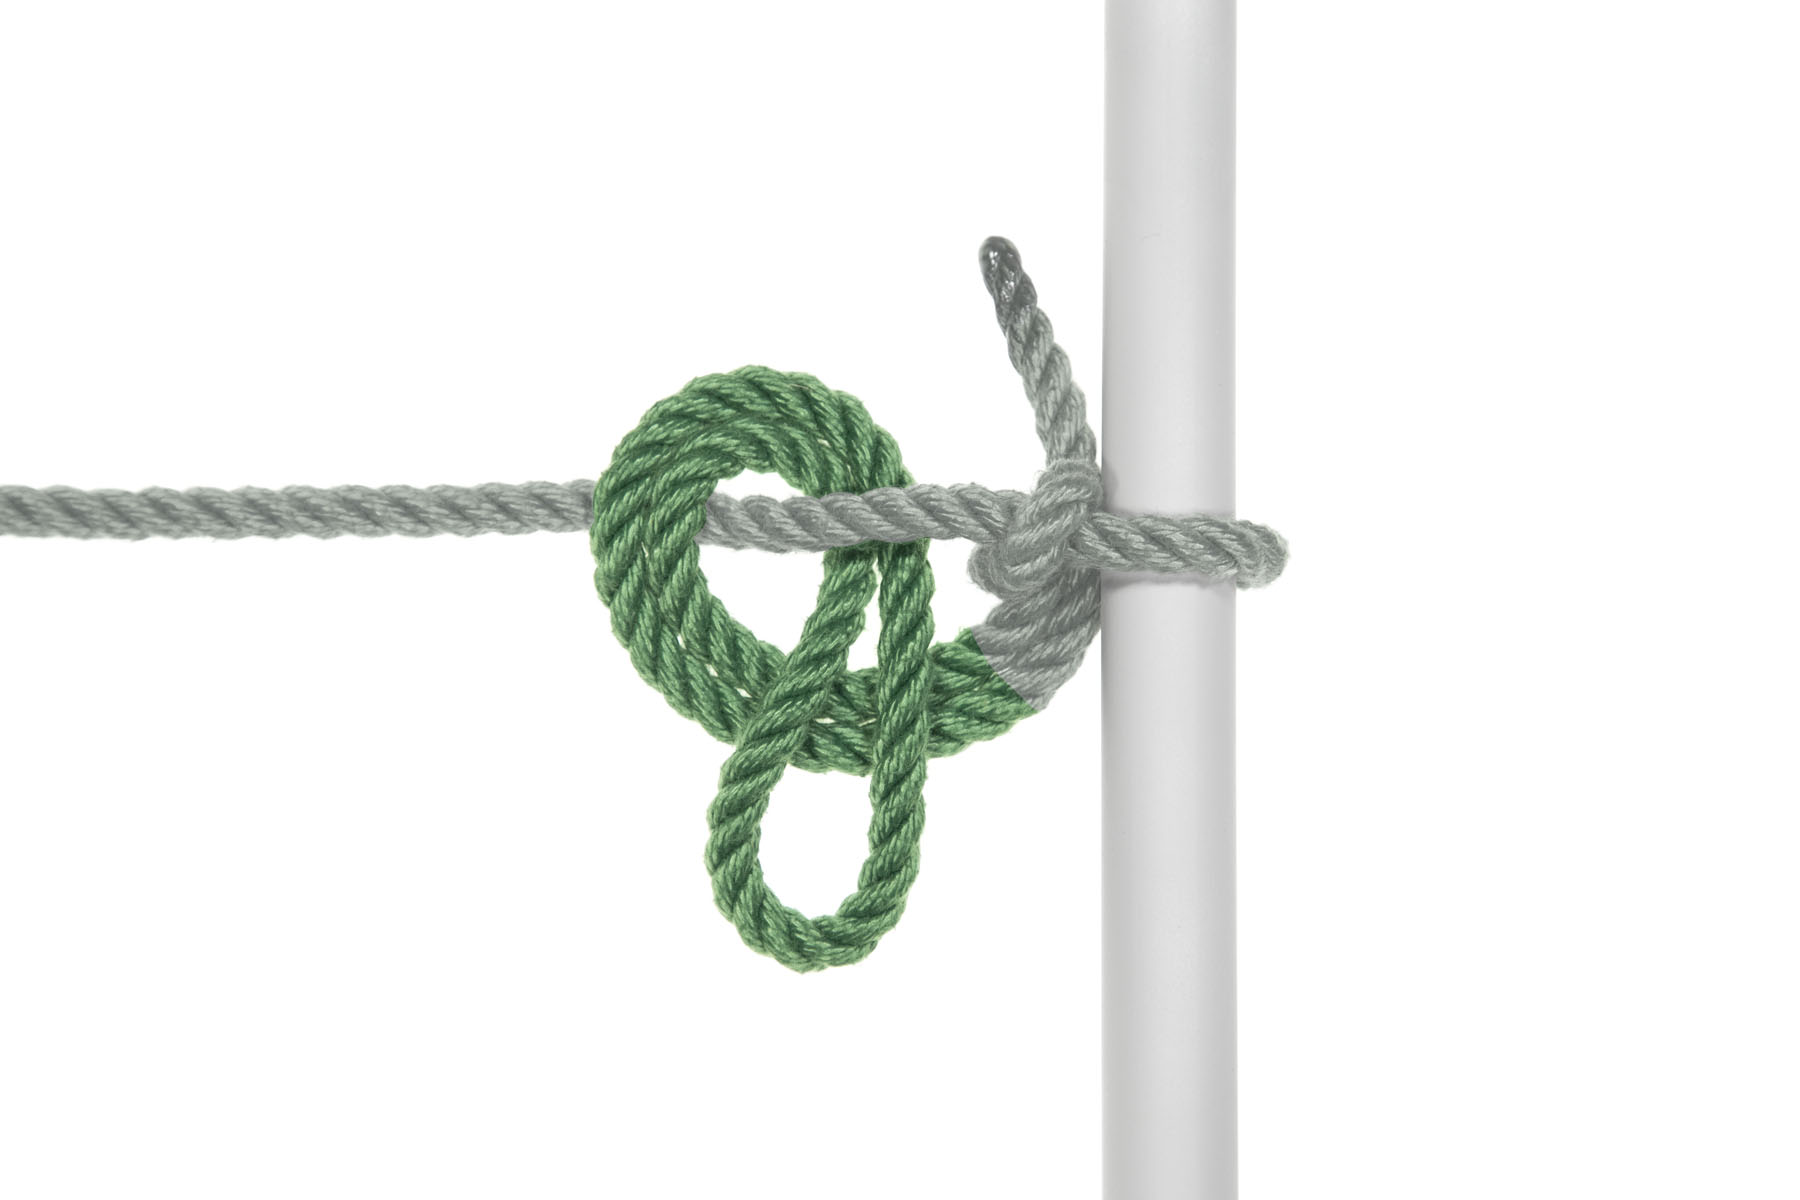 The bight now crosses over the standing part, under the standing part, and over itself, making a second half hitch.